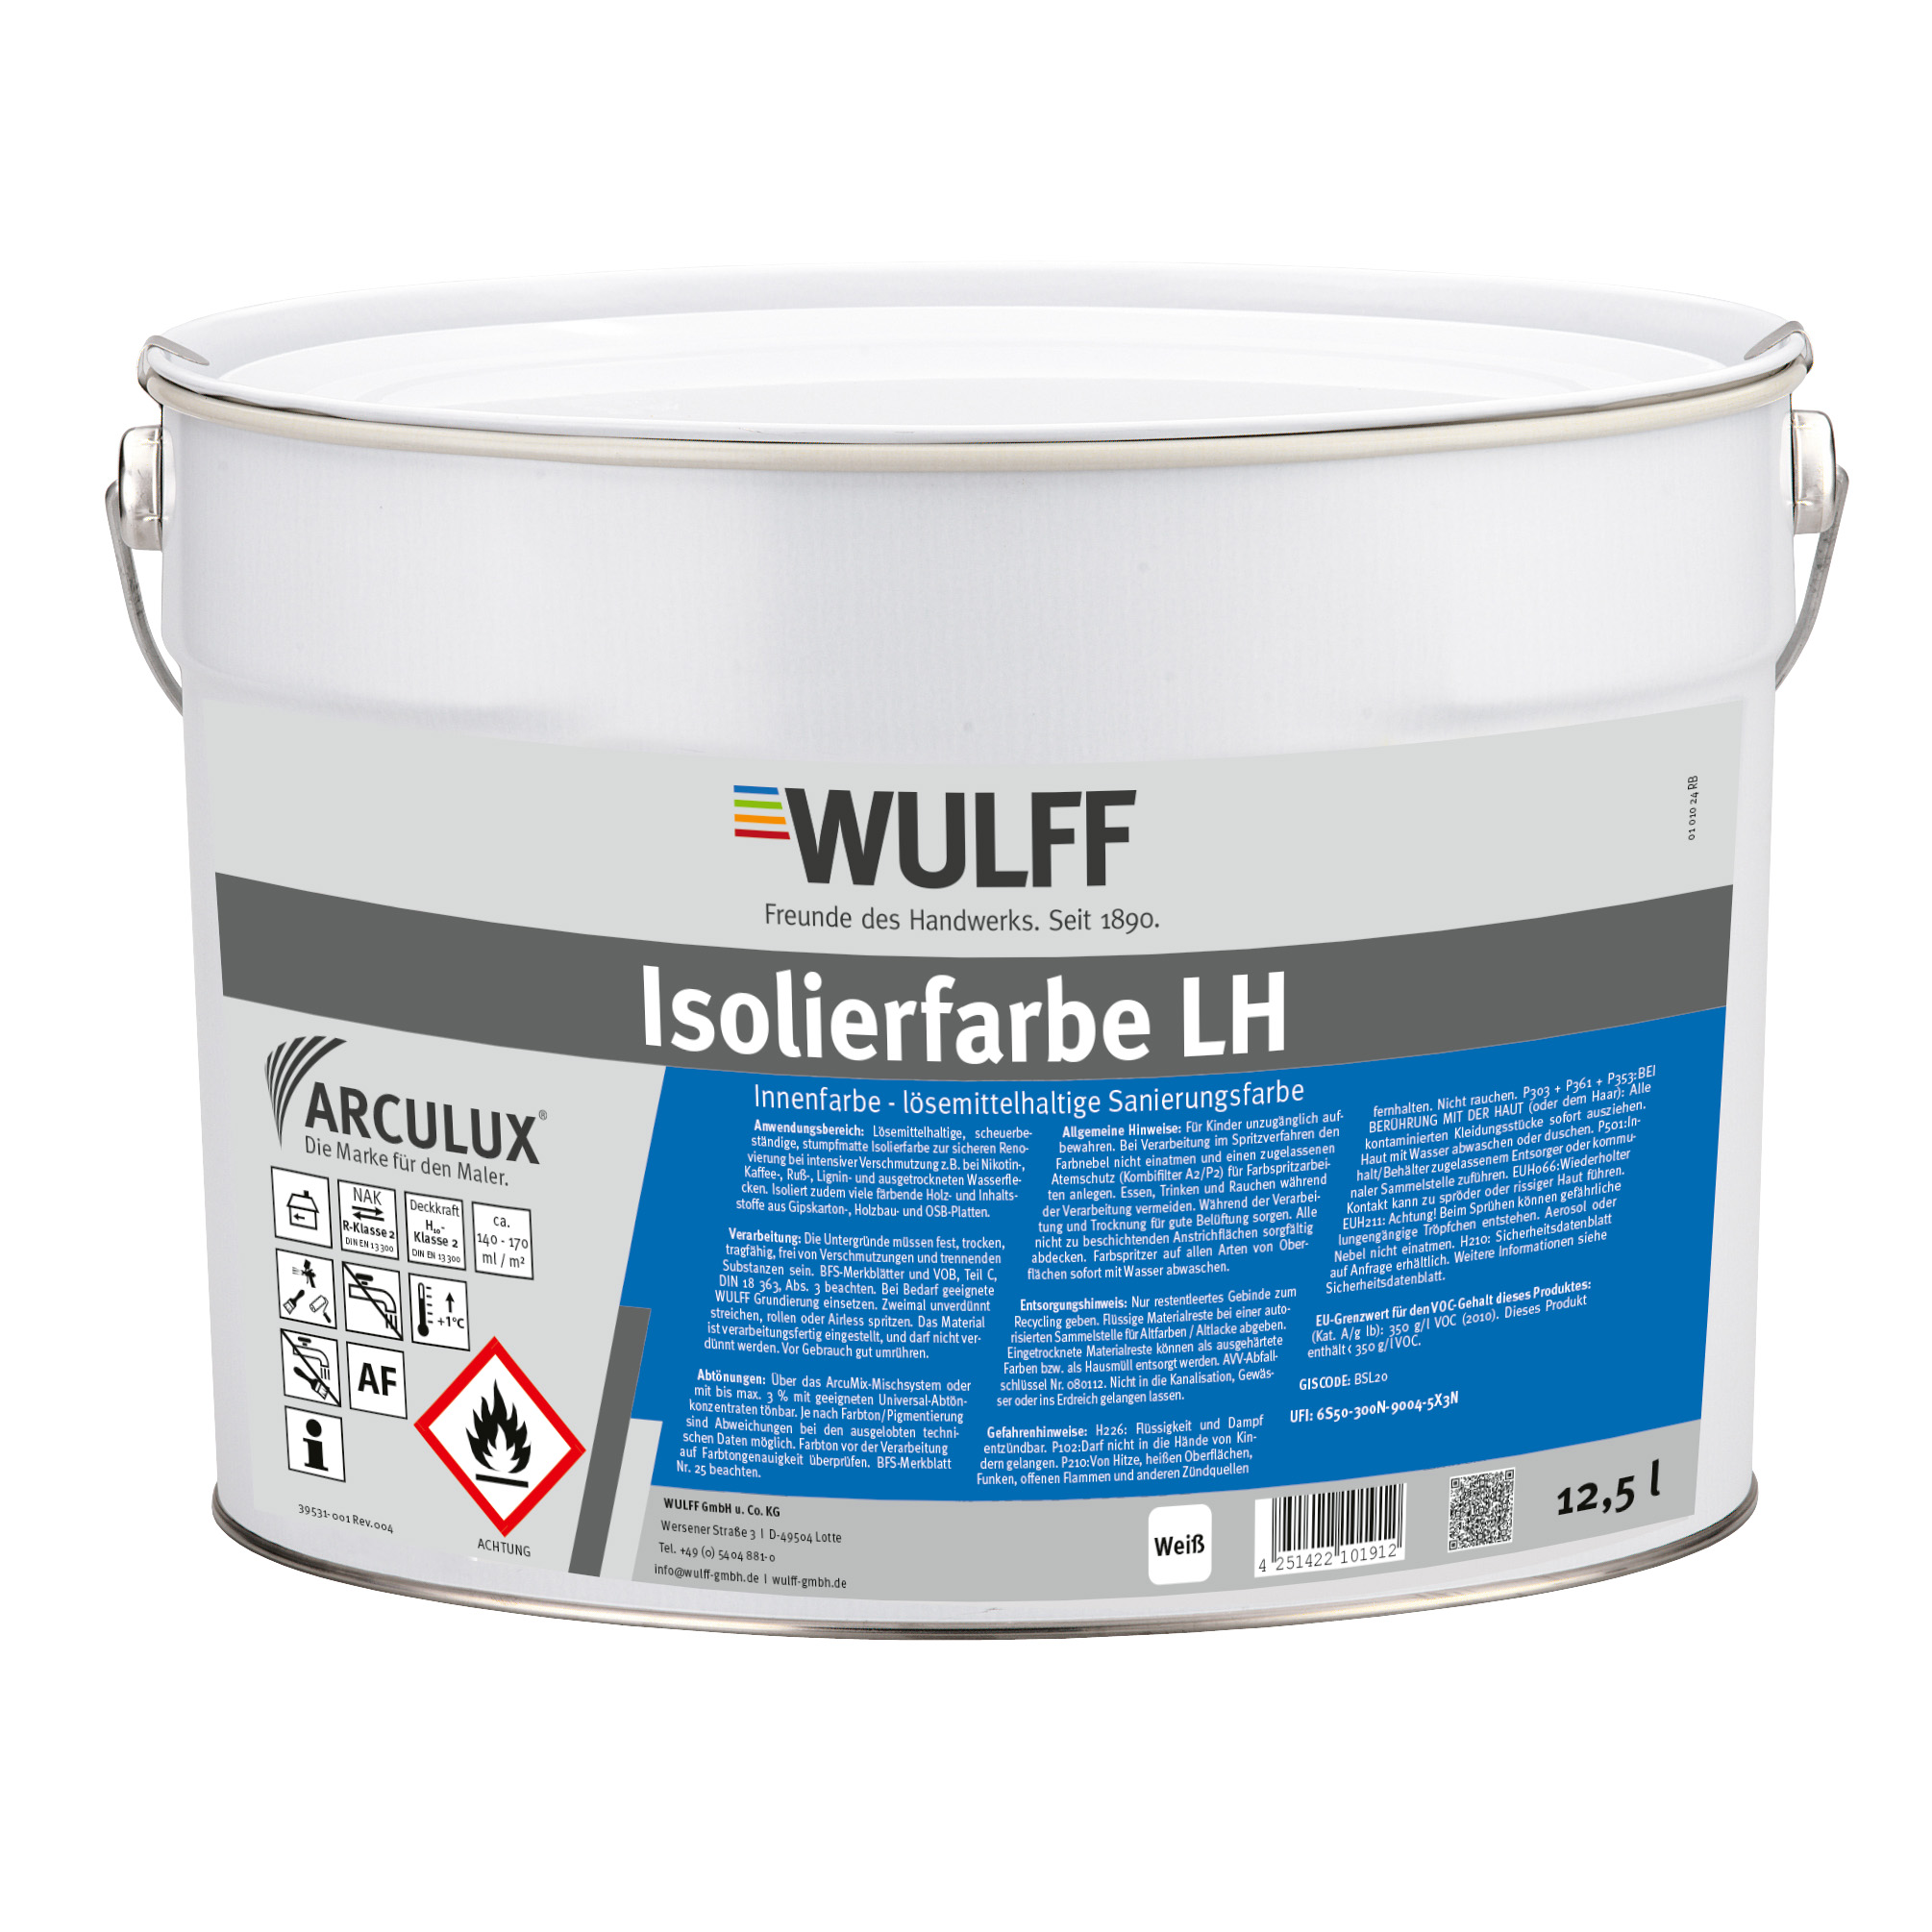 Arculux® Isolierfarbe LH